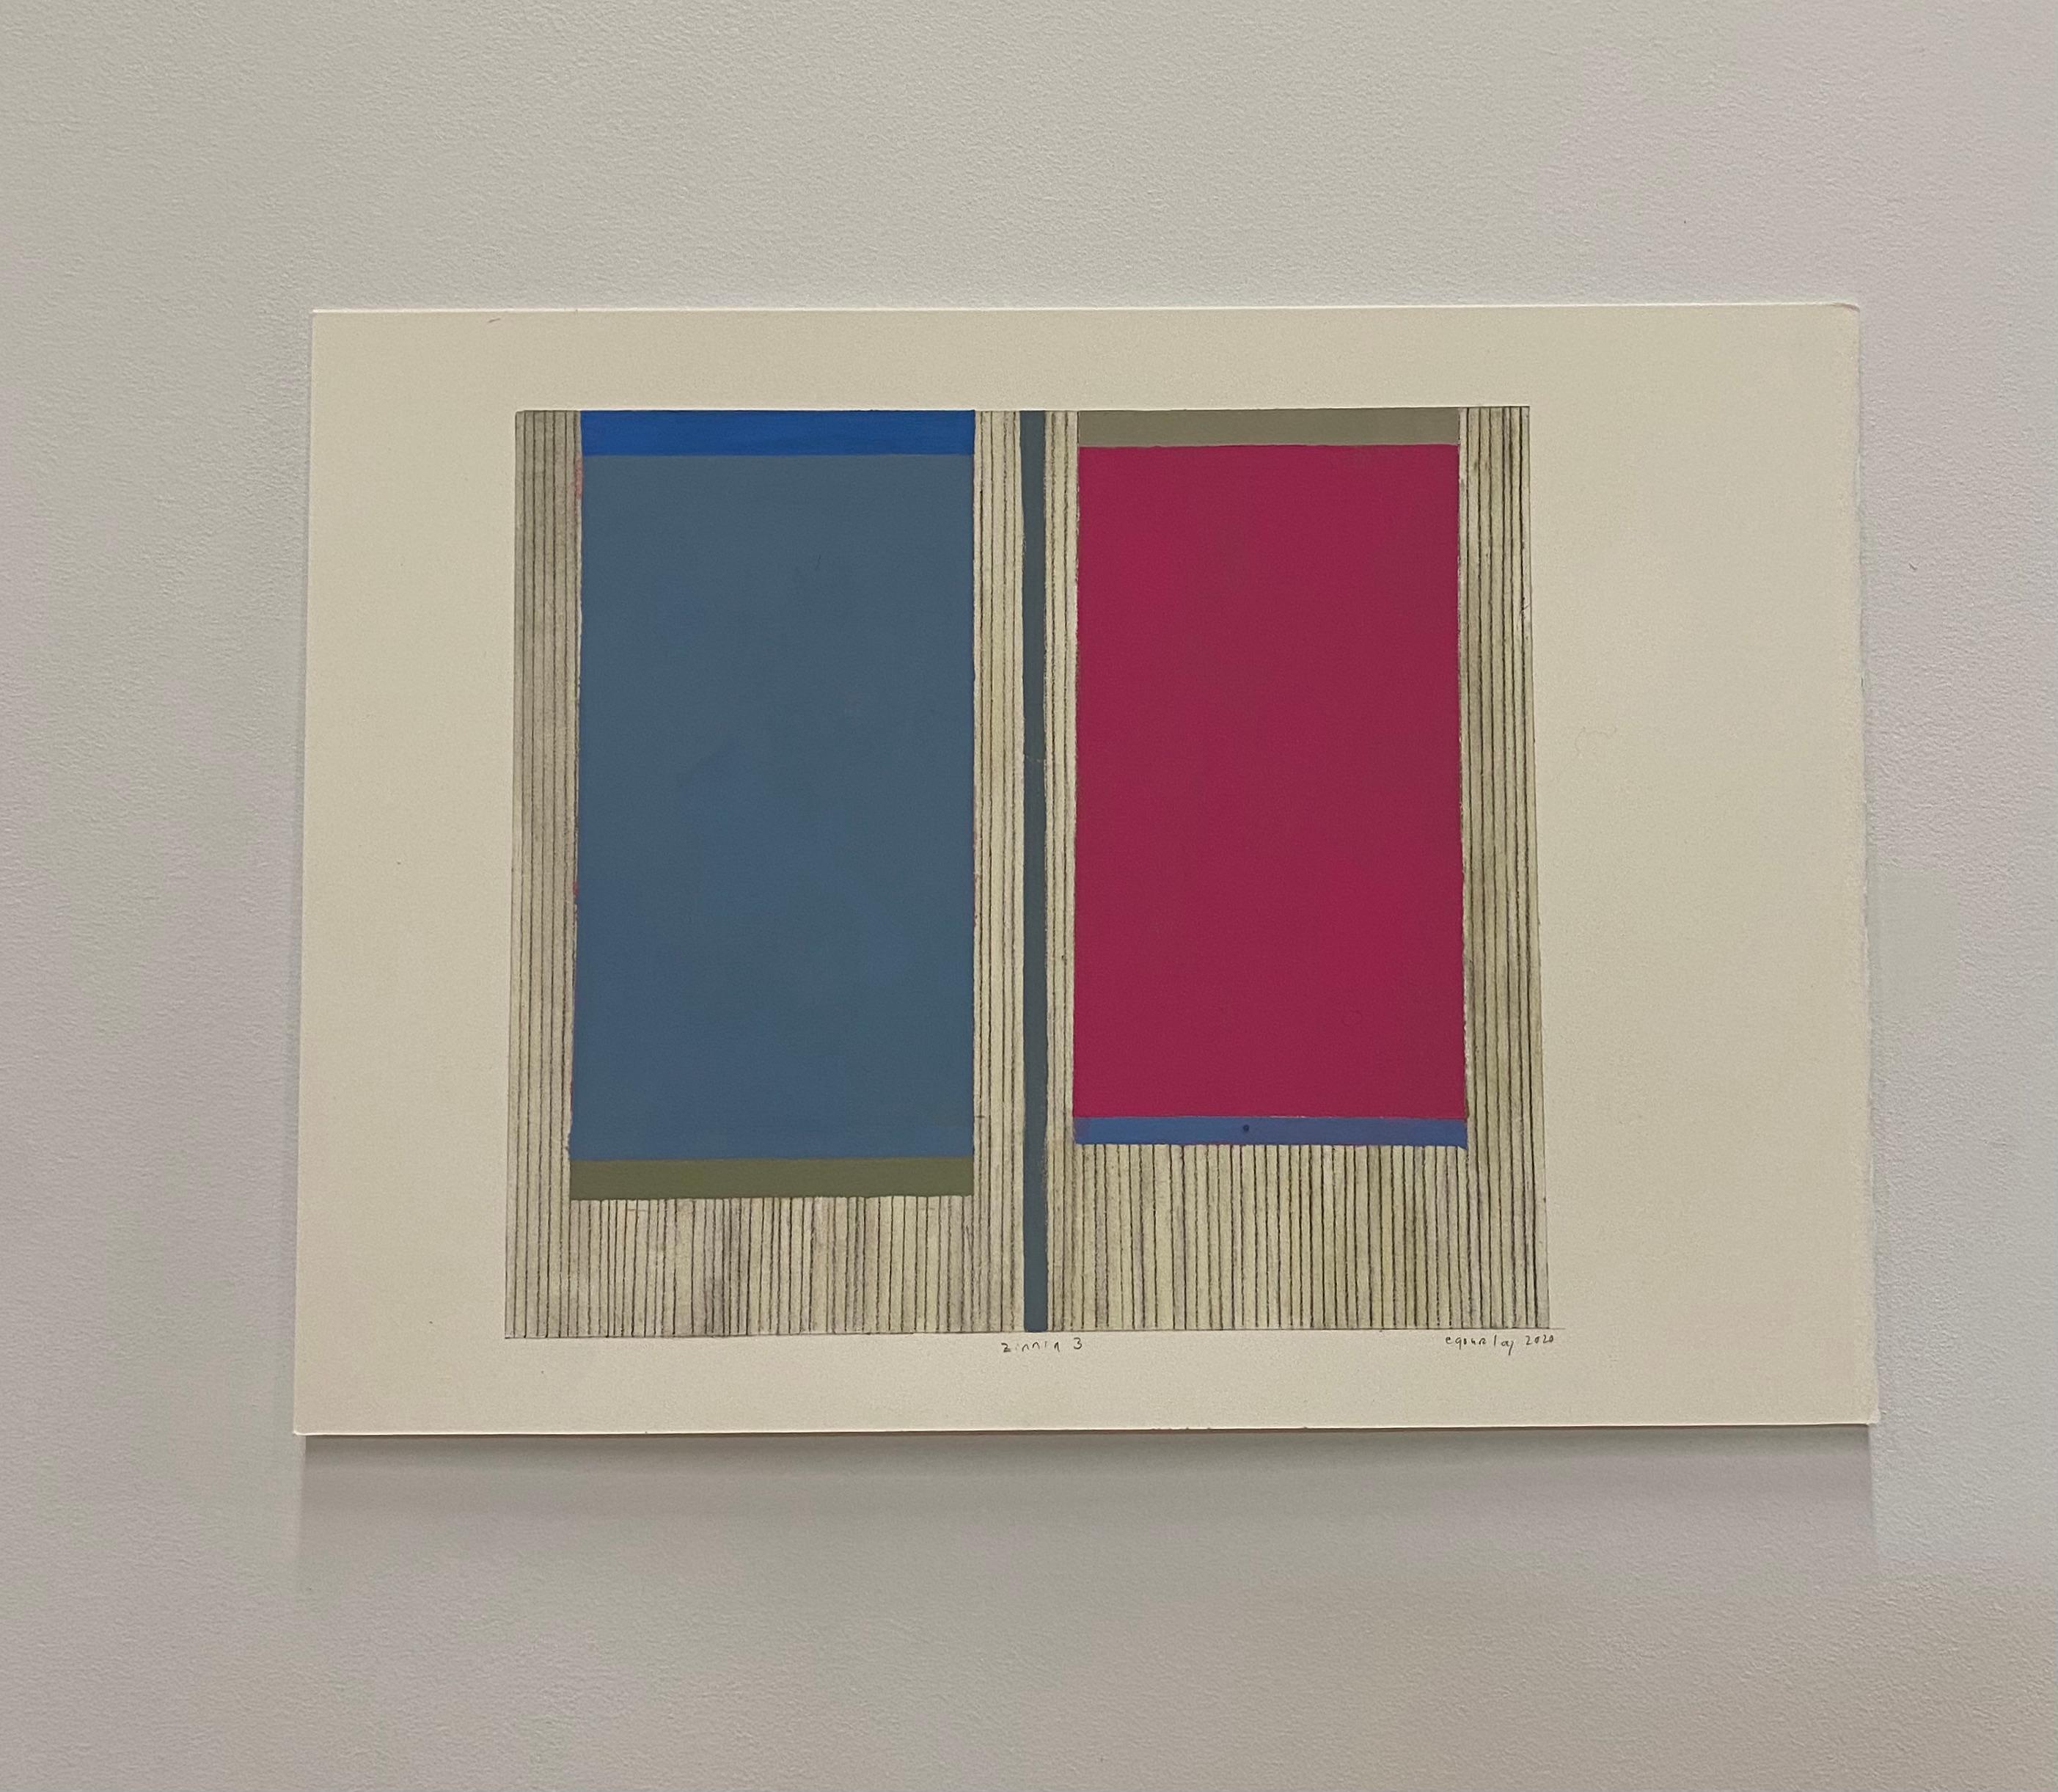 In this abstract painting in colored pencil and gouache on paper by Elizabeth Gourlay, clean and precise, carefully ordered blocks of color in shades of dark magenta pink and bluish gray with thin brown lines are bright and luminous against the